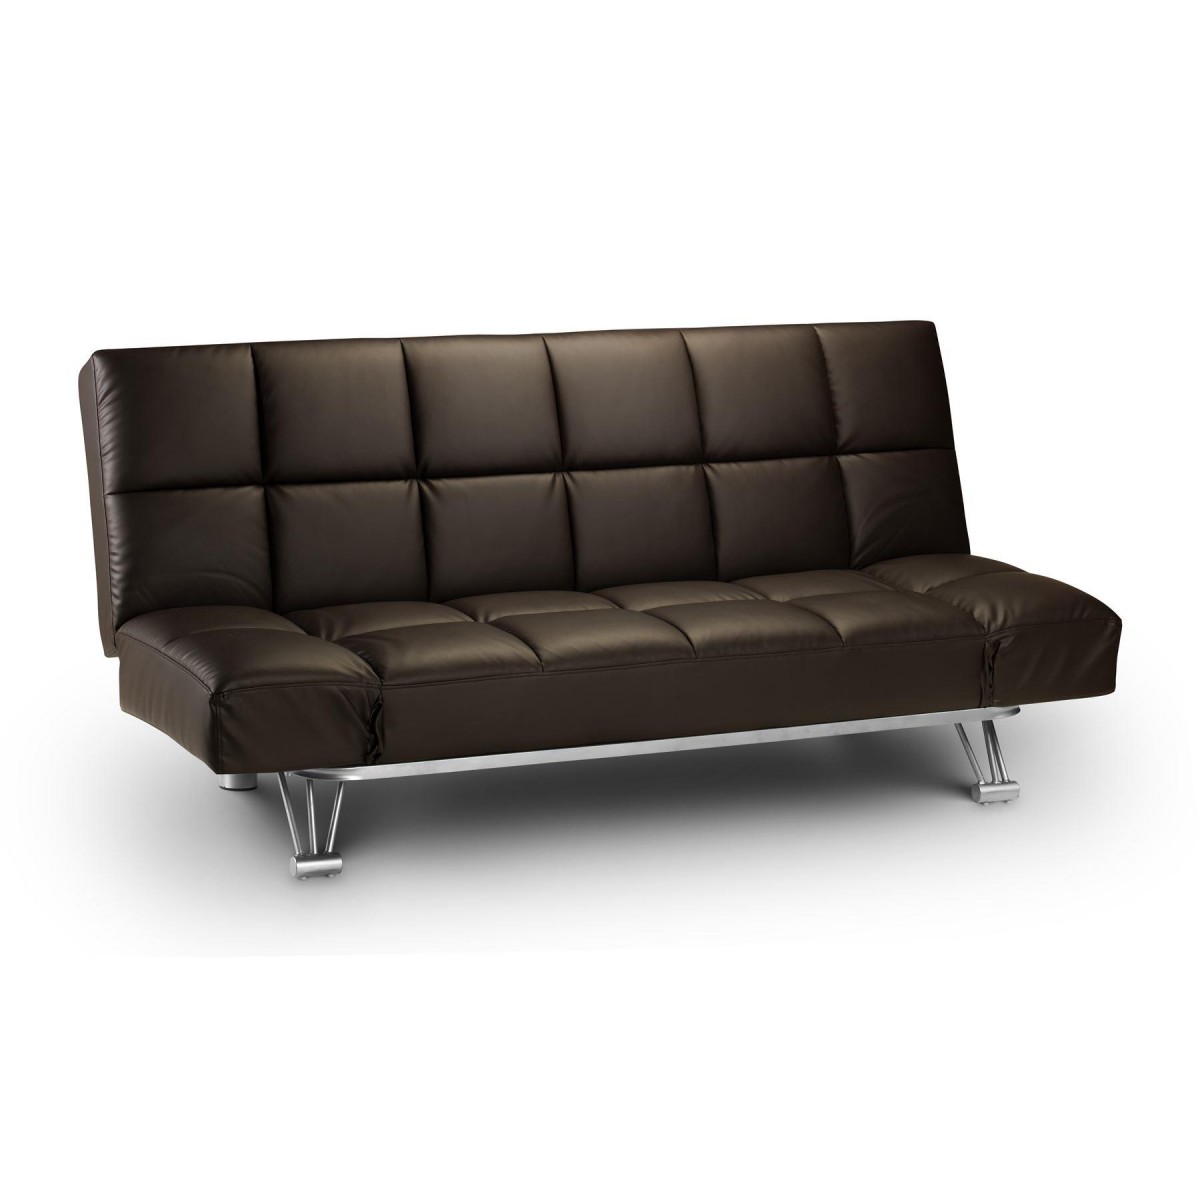 Faux Leather Chair, Modern Sofa Bed